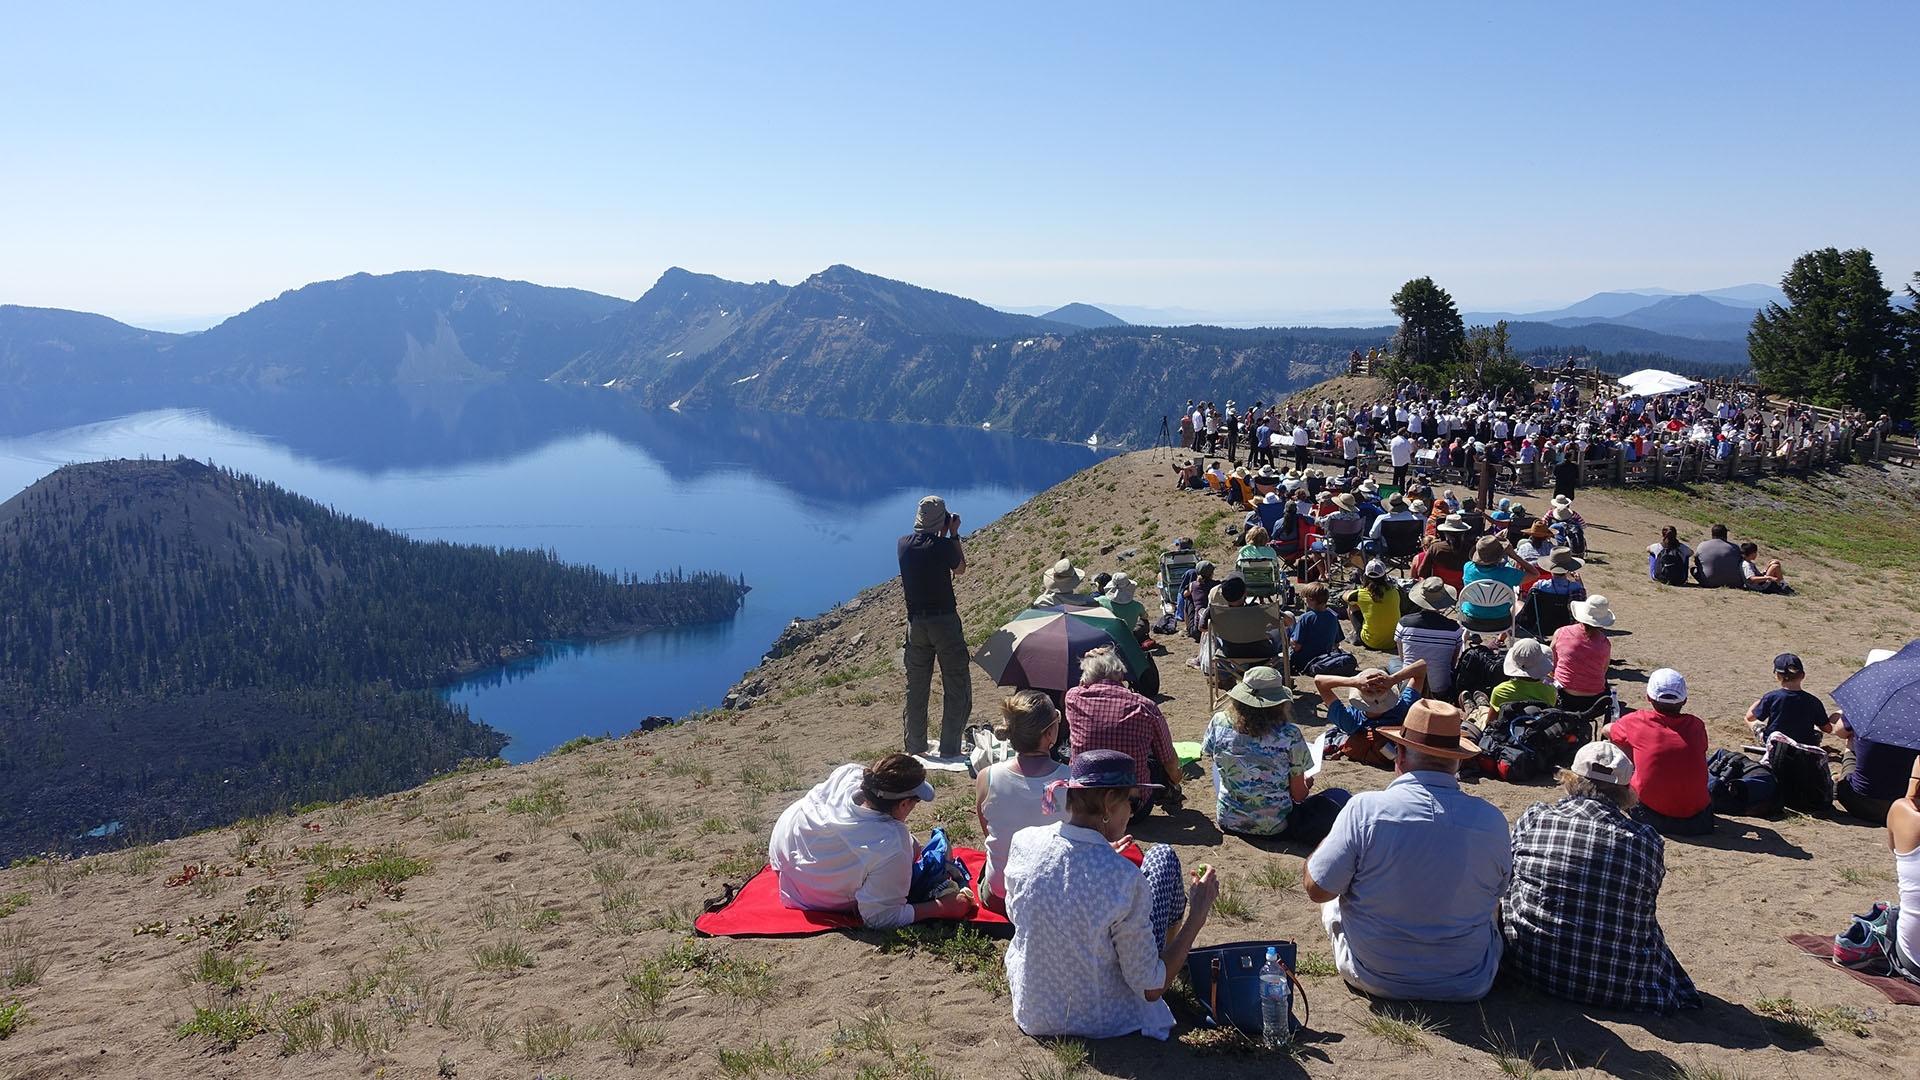 Conductor Teddy Abrams and the Orchestra perform “Natural History” at the rim of Crater Lake